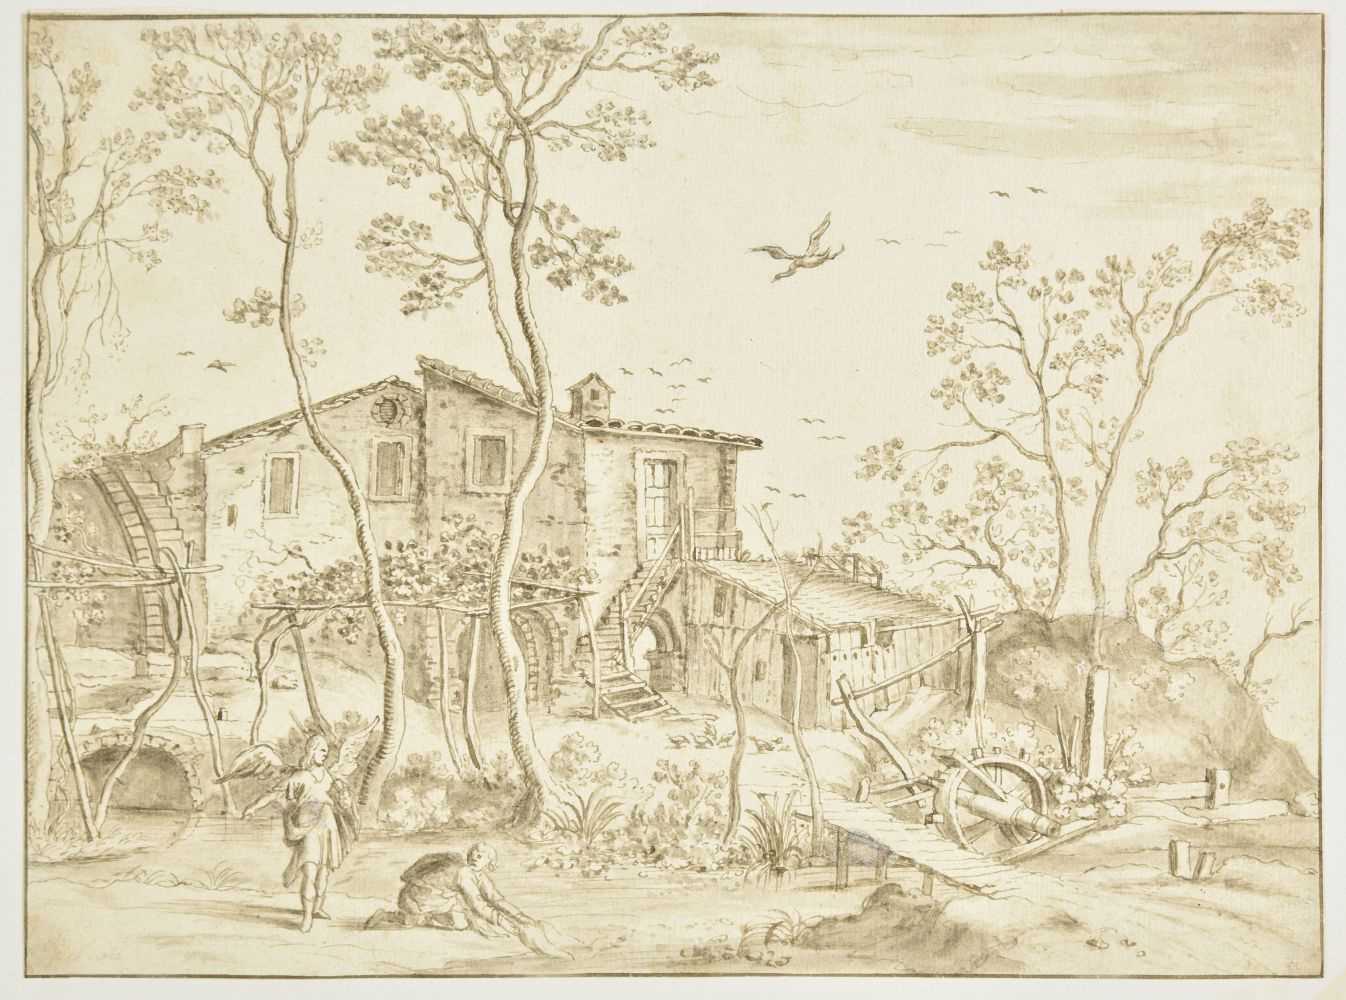 Lot 221 - Flemish School, Rustic landscape with Tobias and the Angel, 17th century